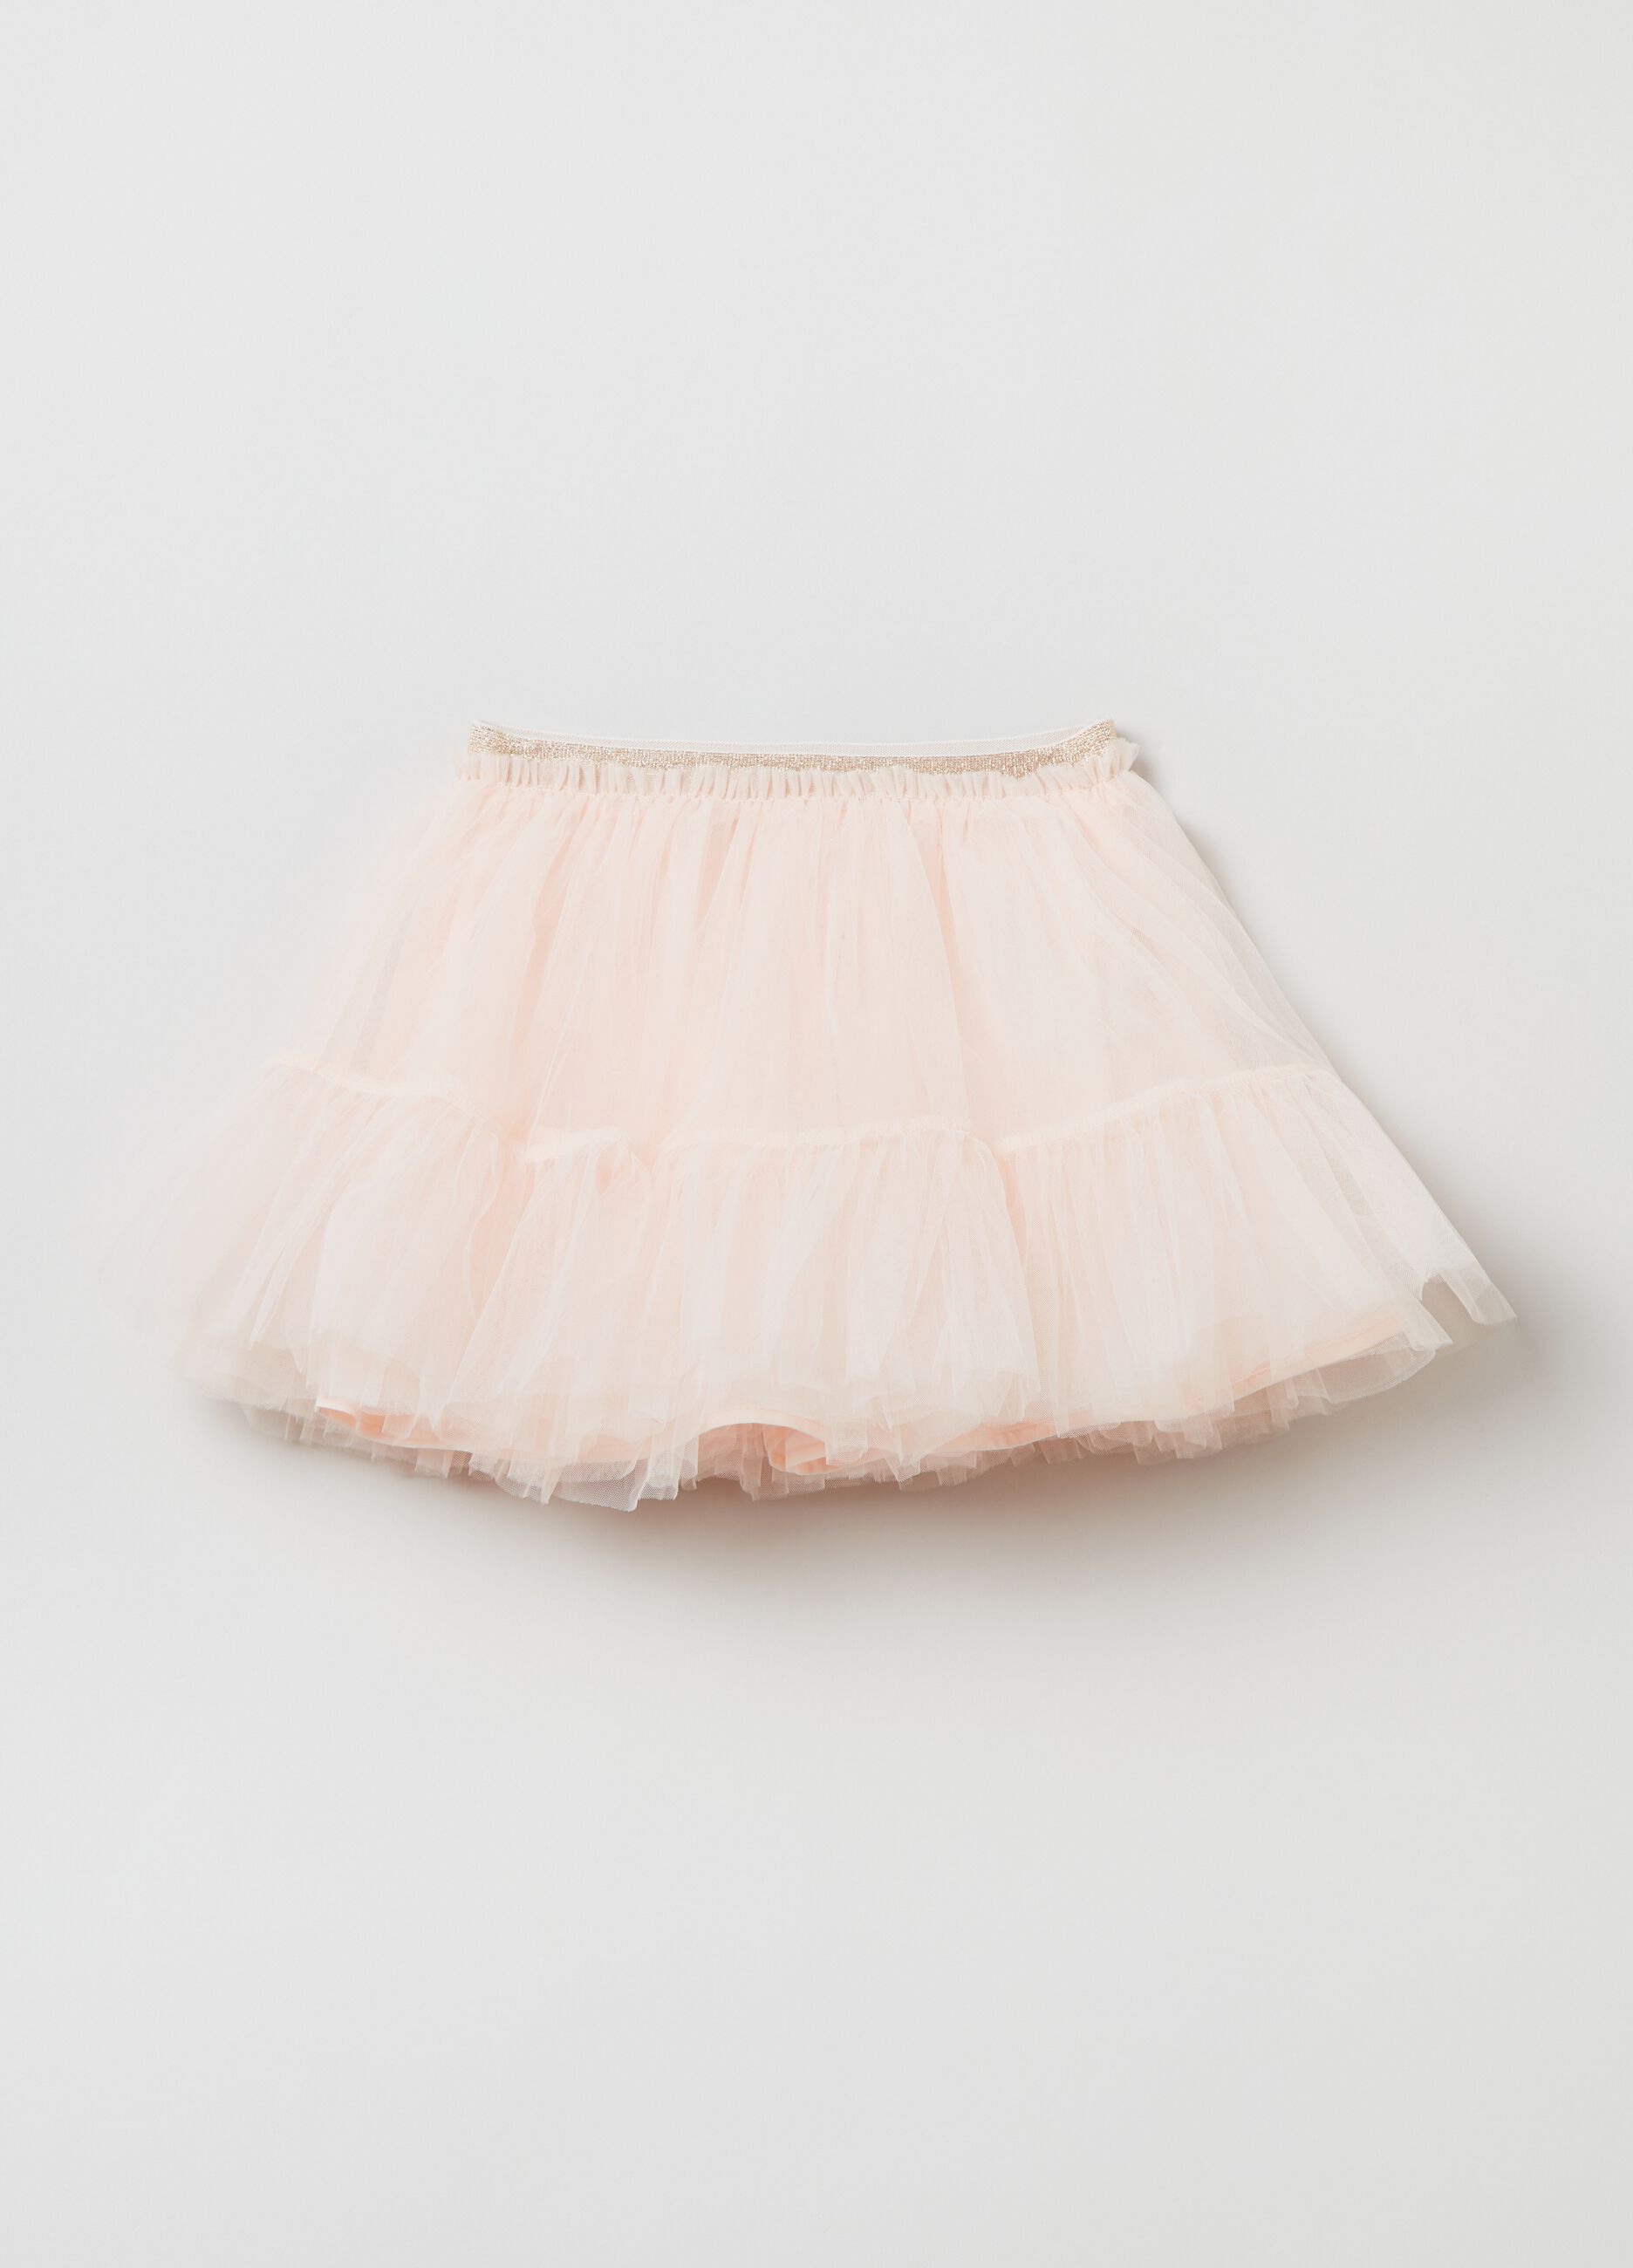 Wide skirt in tulle